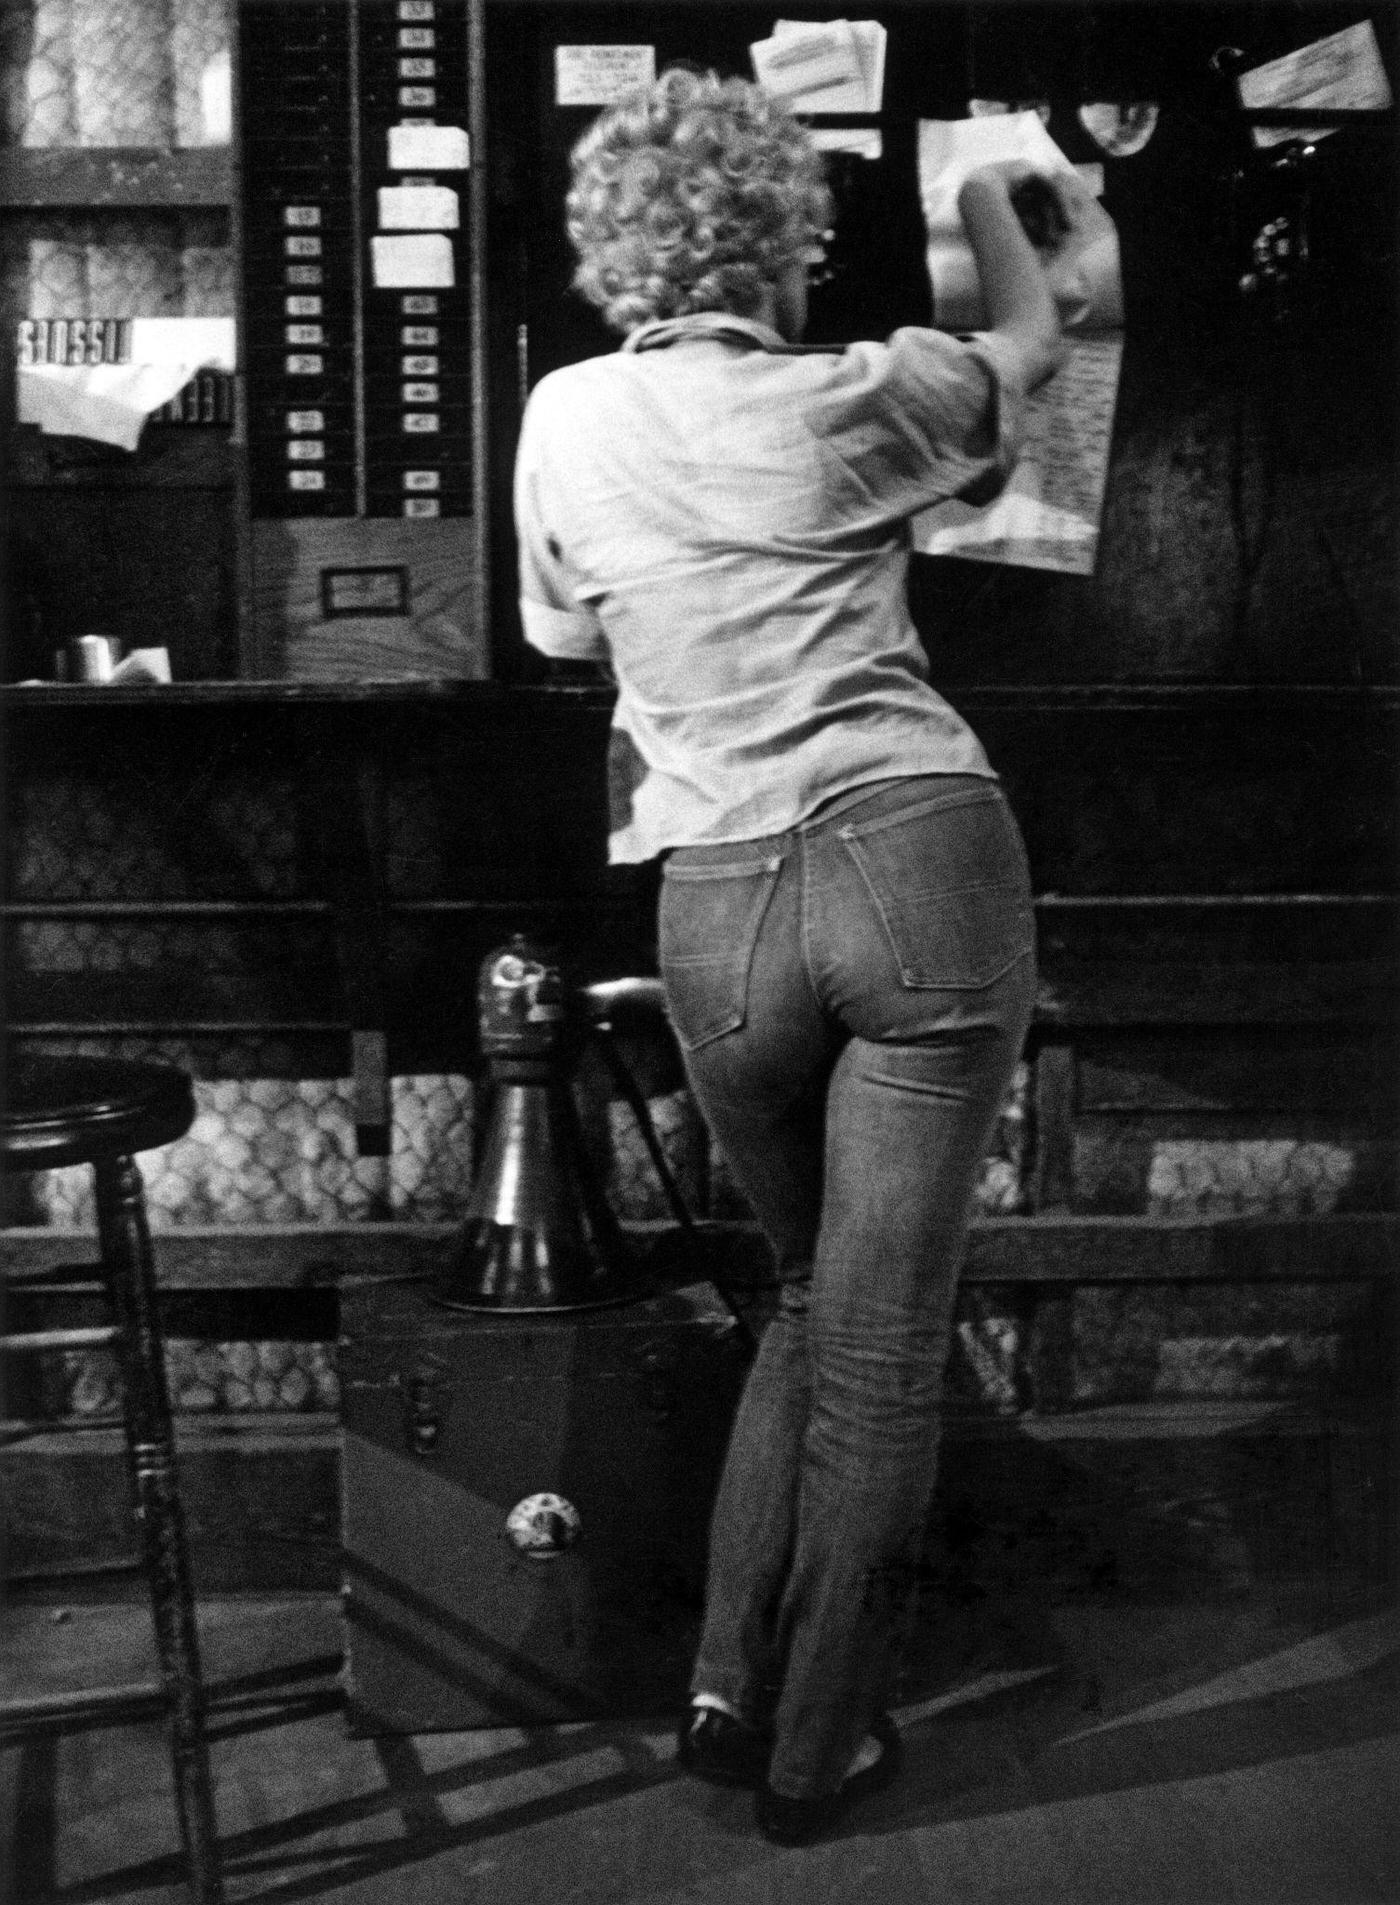 Marilyn Monroe wearing blue jeans backstage at the 20th Century Fox studio in 1954 during the filming of "The Seven Year Itch"